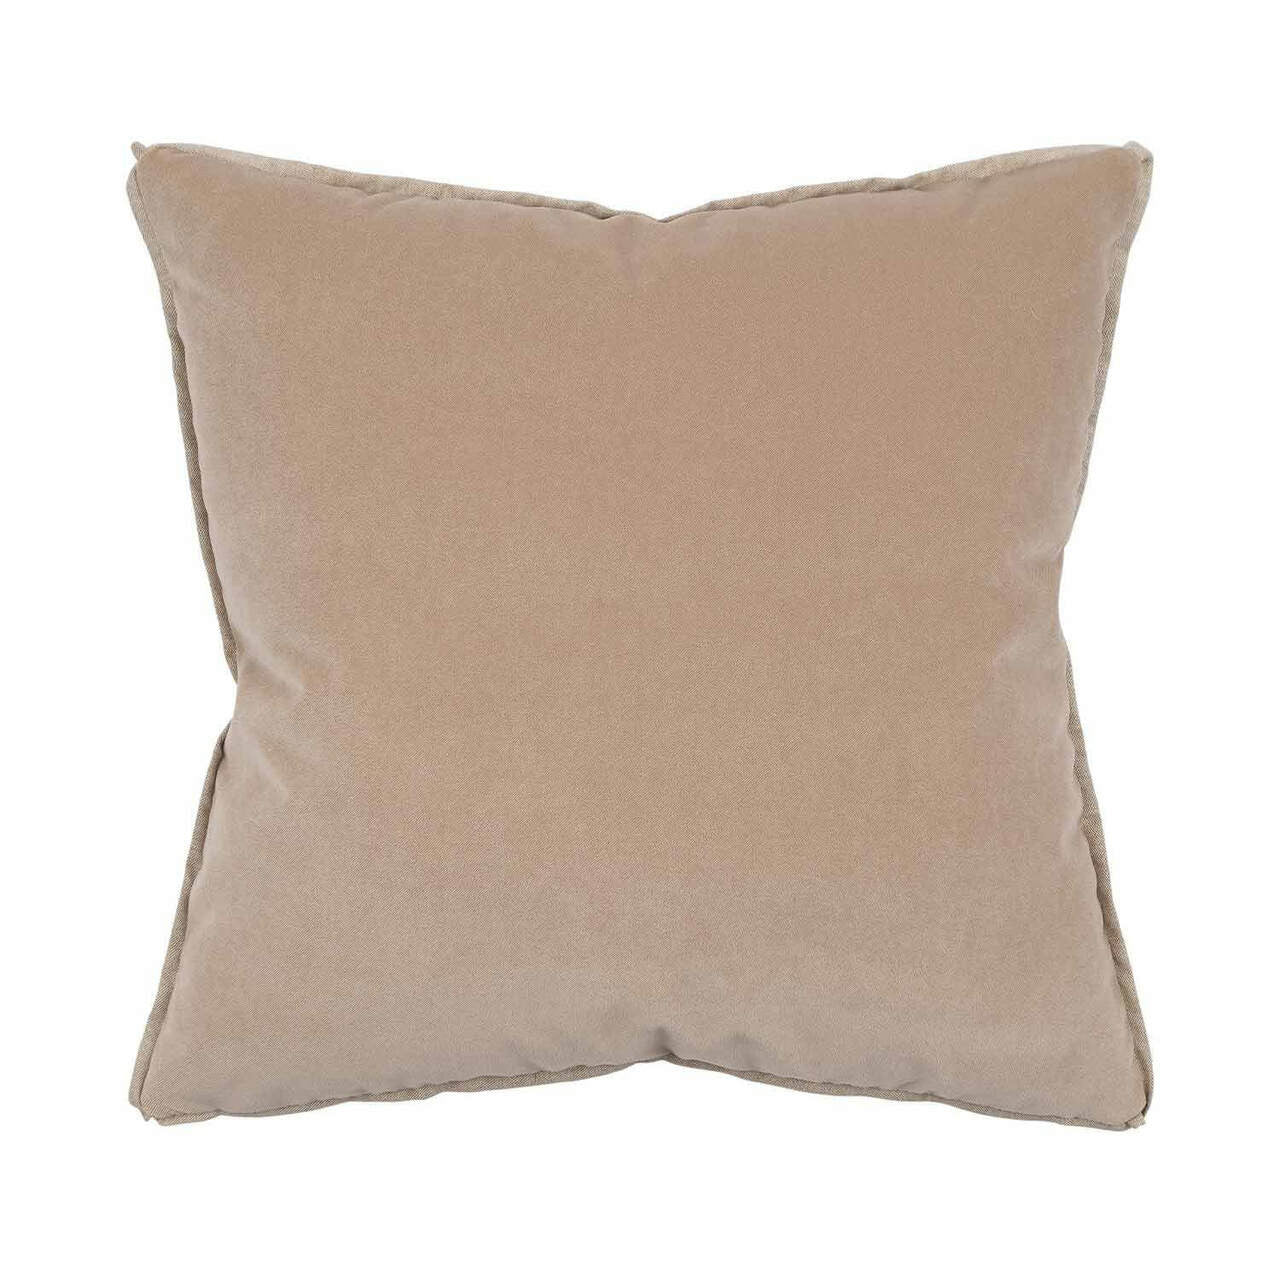 Banks Pillow in Oatmeal